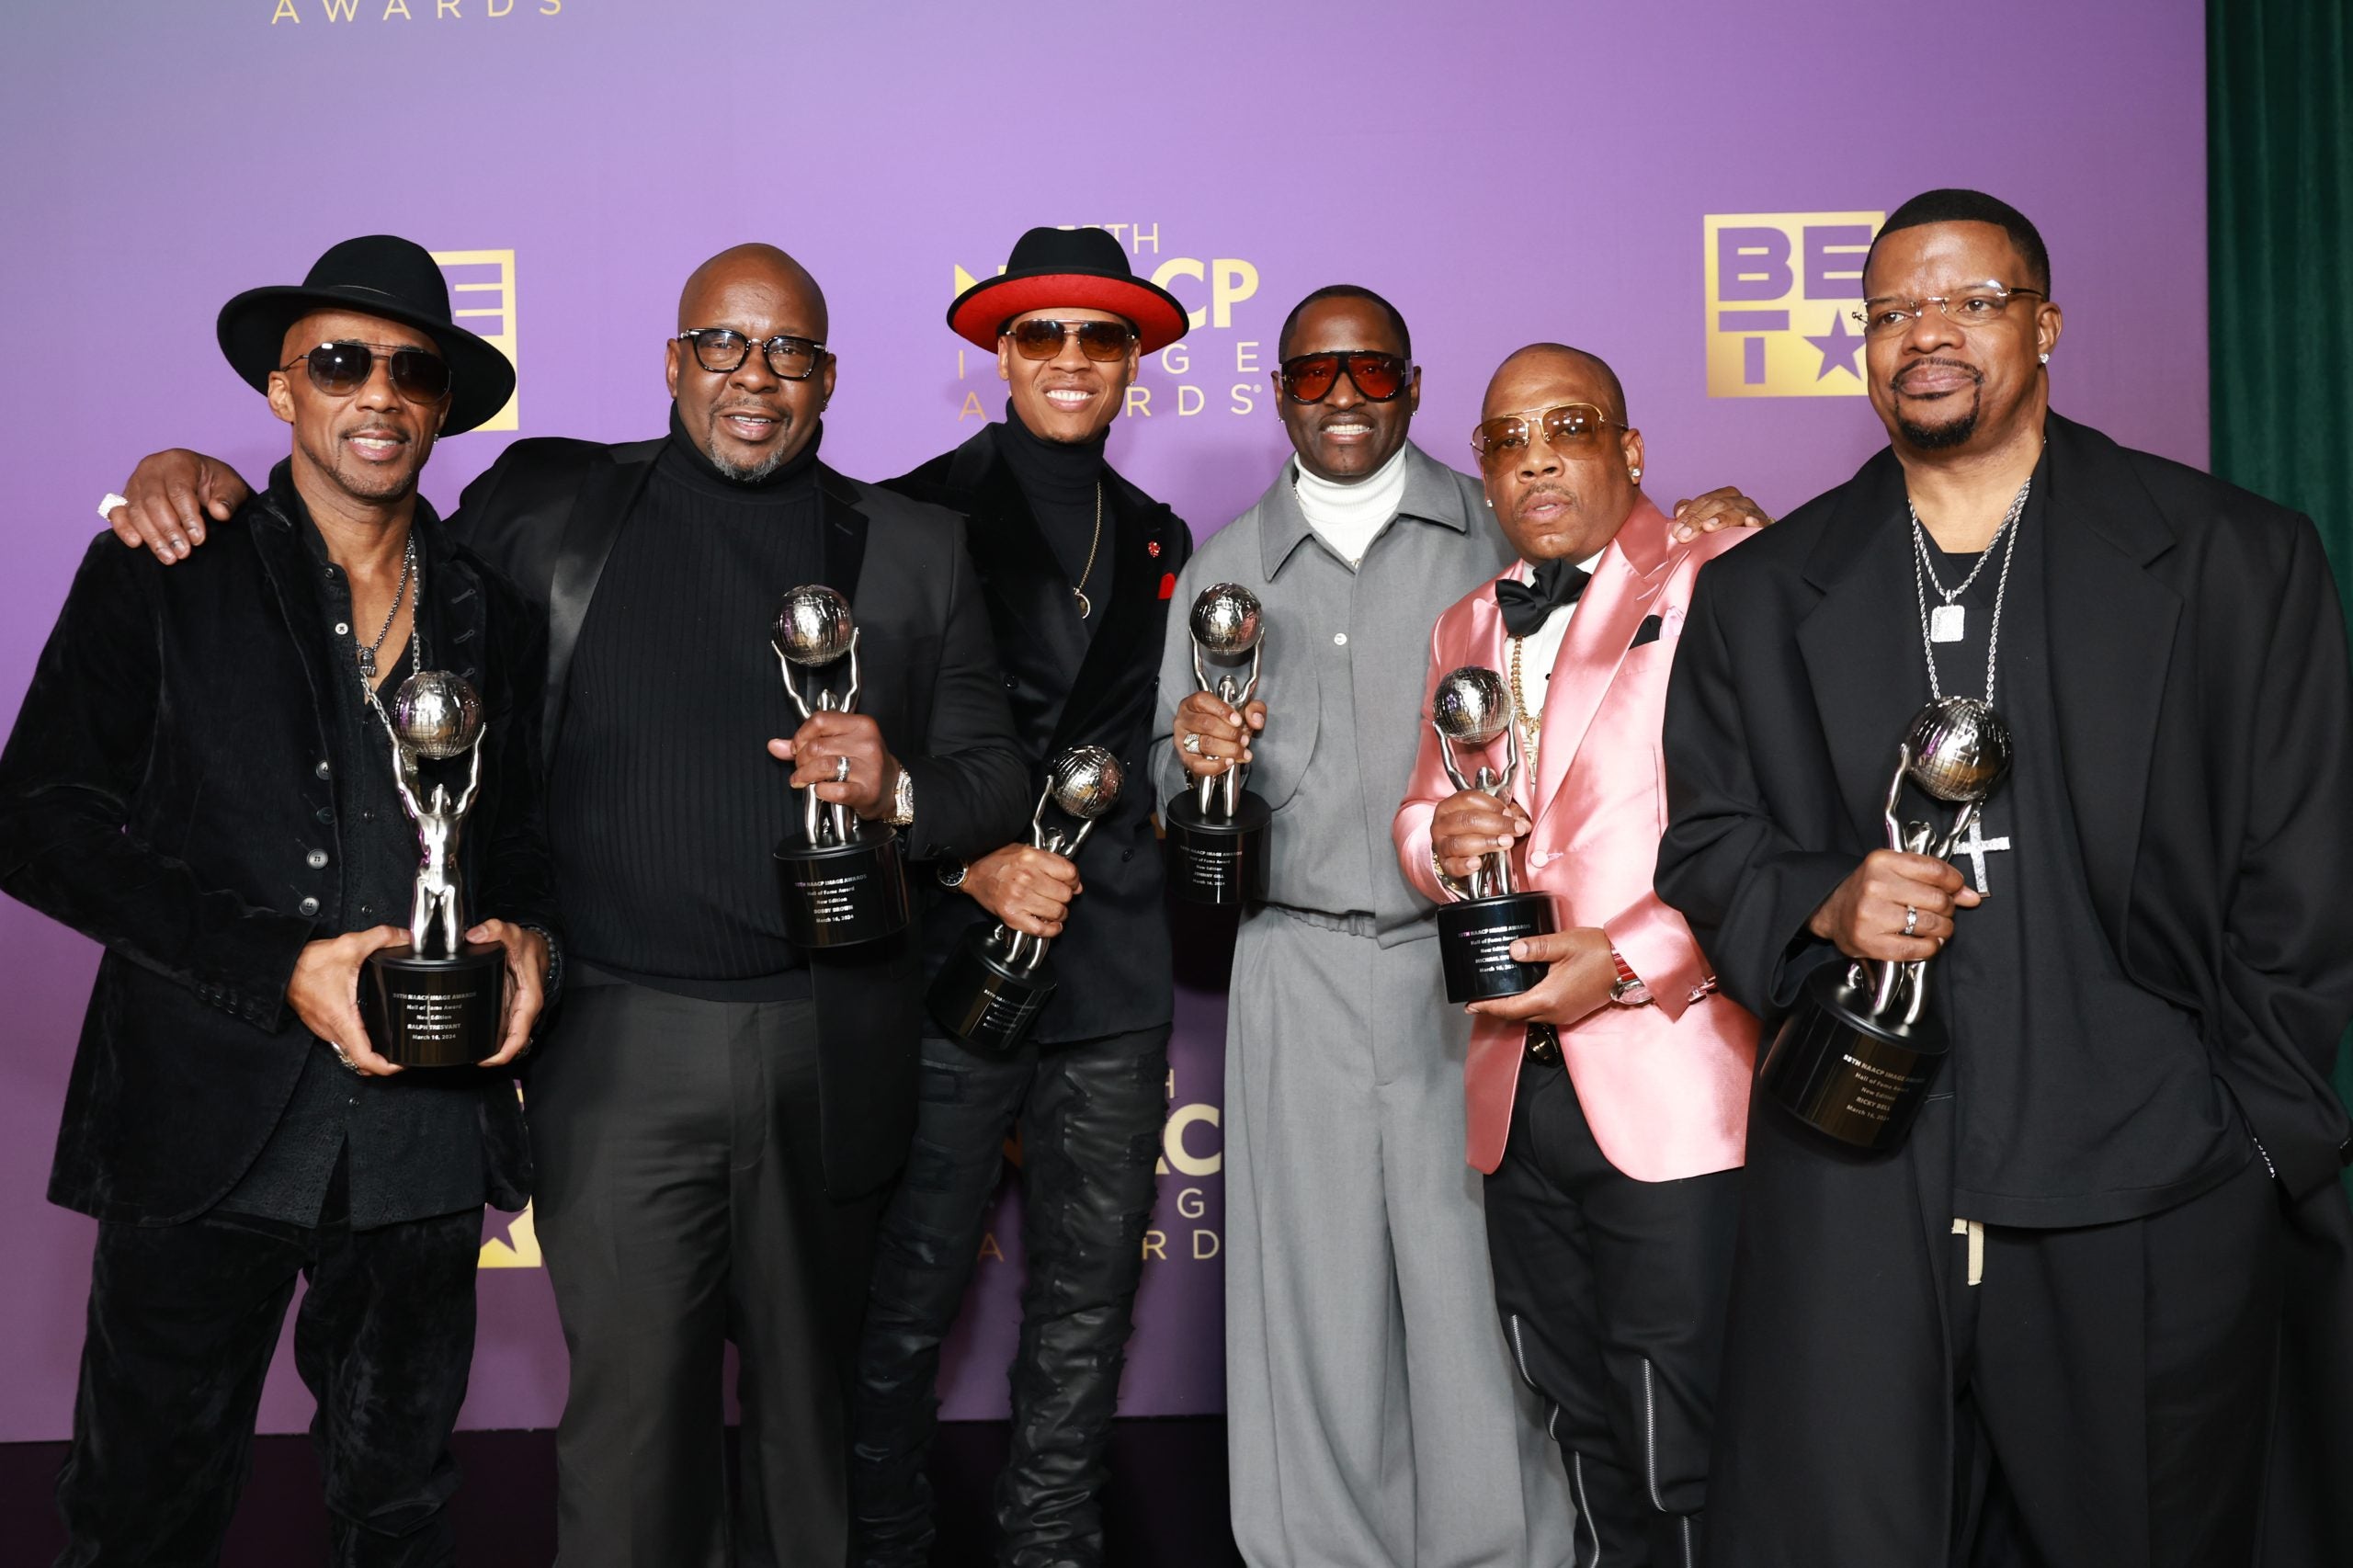 Usher And ‘The Color Purple’ Win Big At The 55th NAACP Image Awards